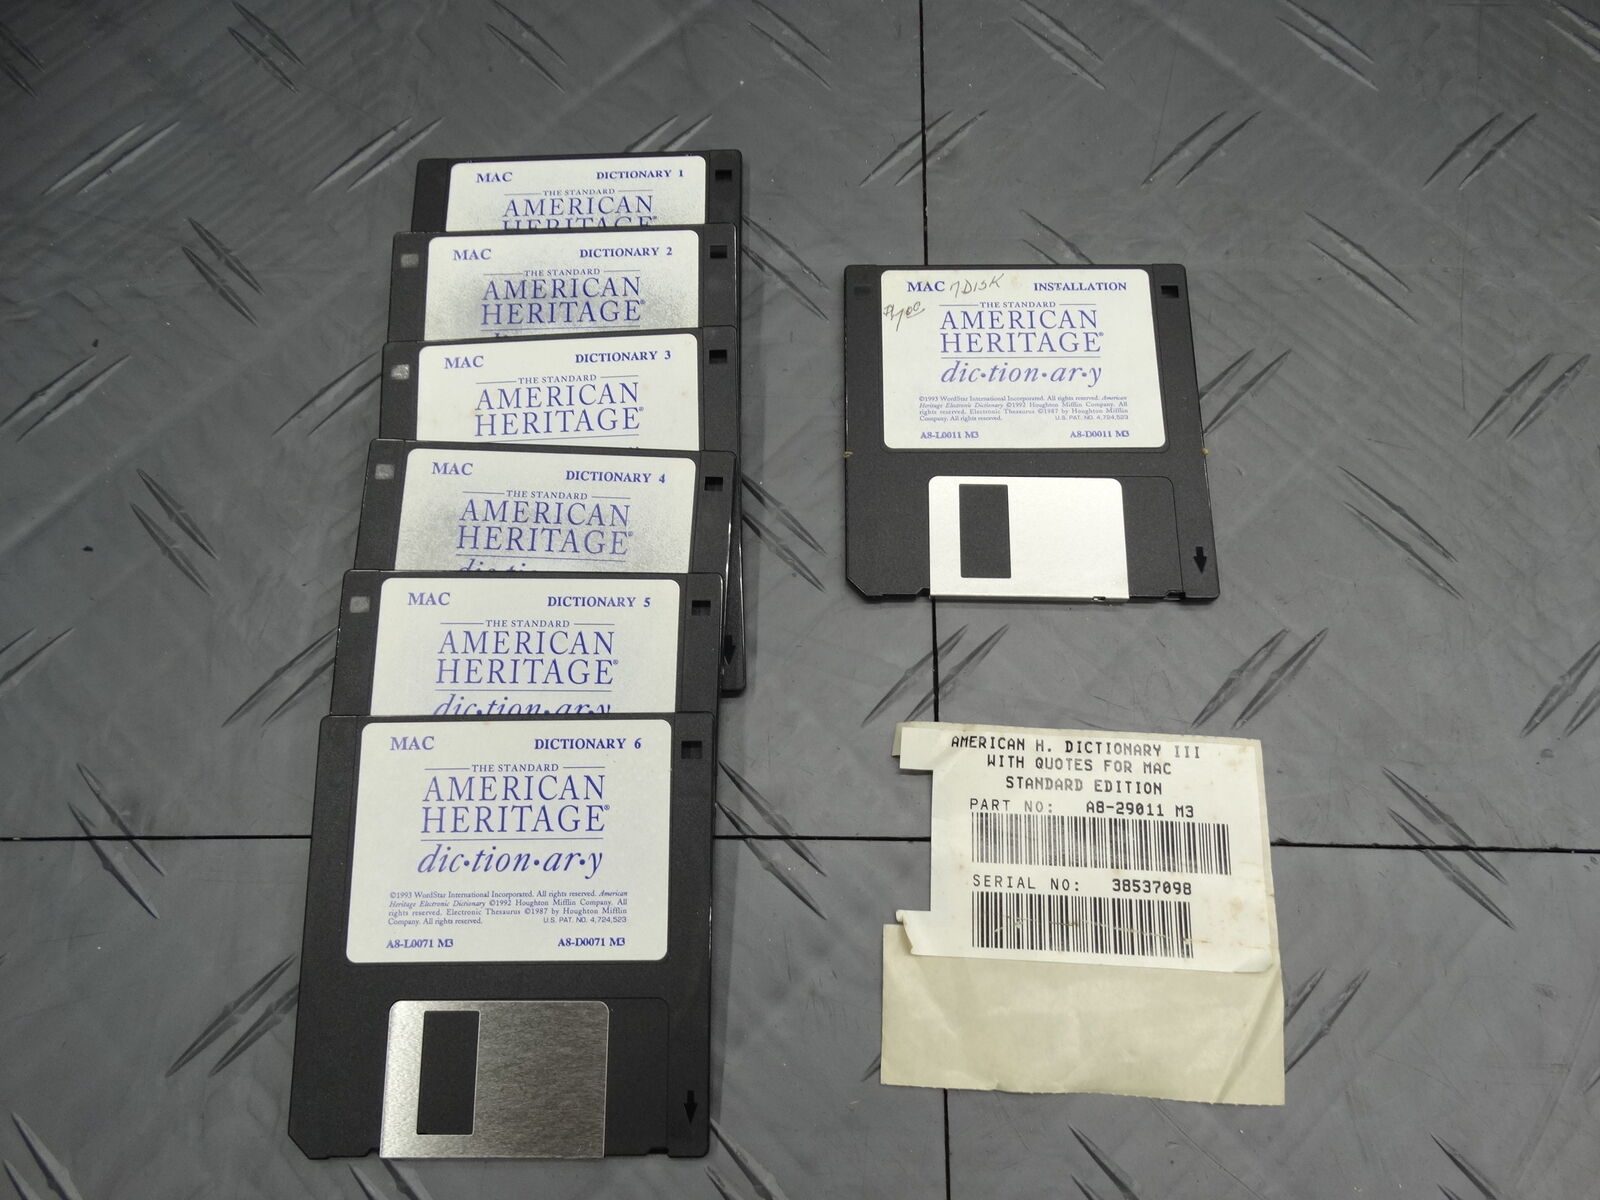 American Heritage Dictionary for Mac 3.5in Floppy Complete Set Vintage